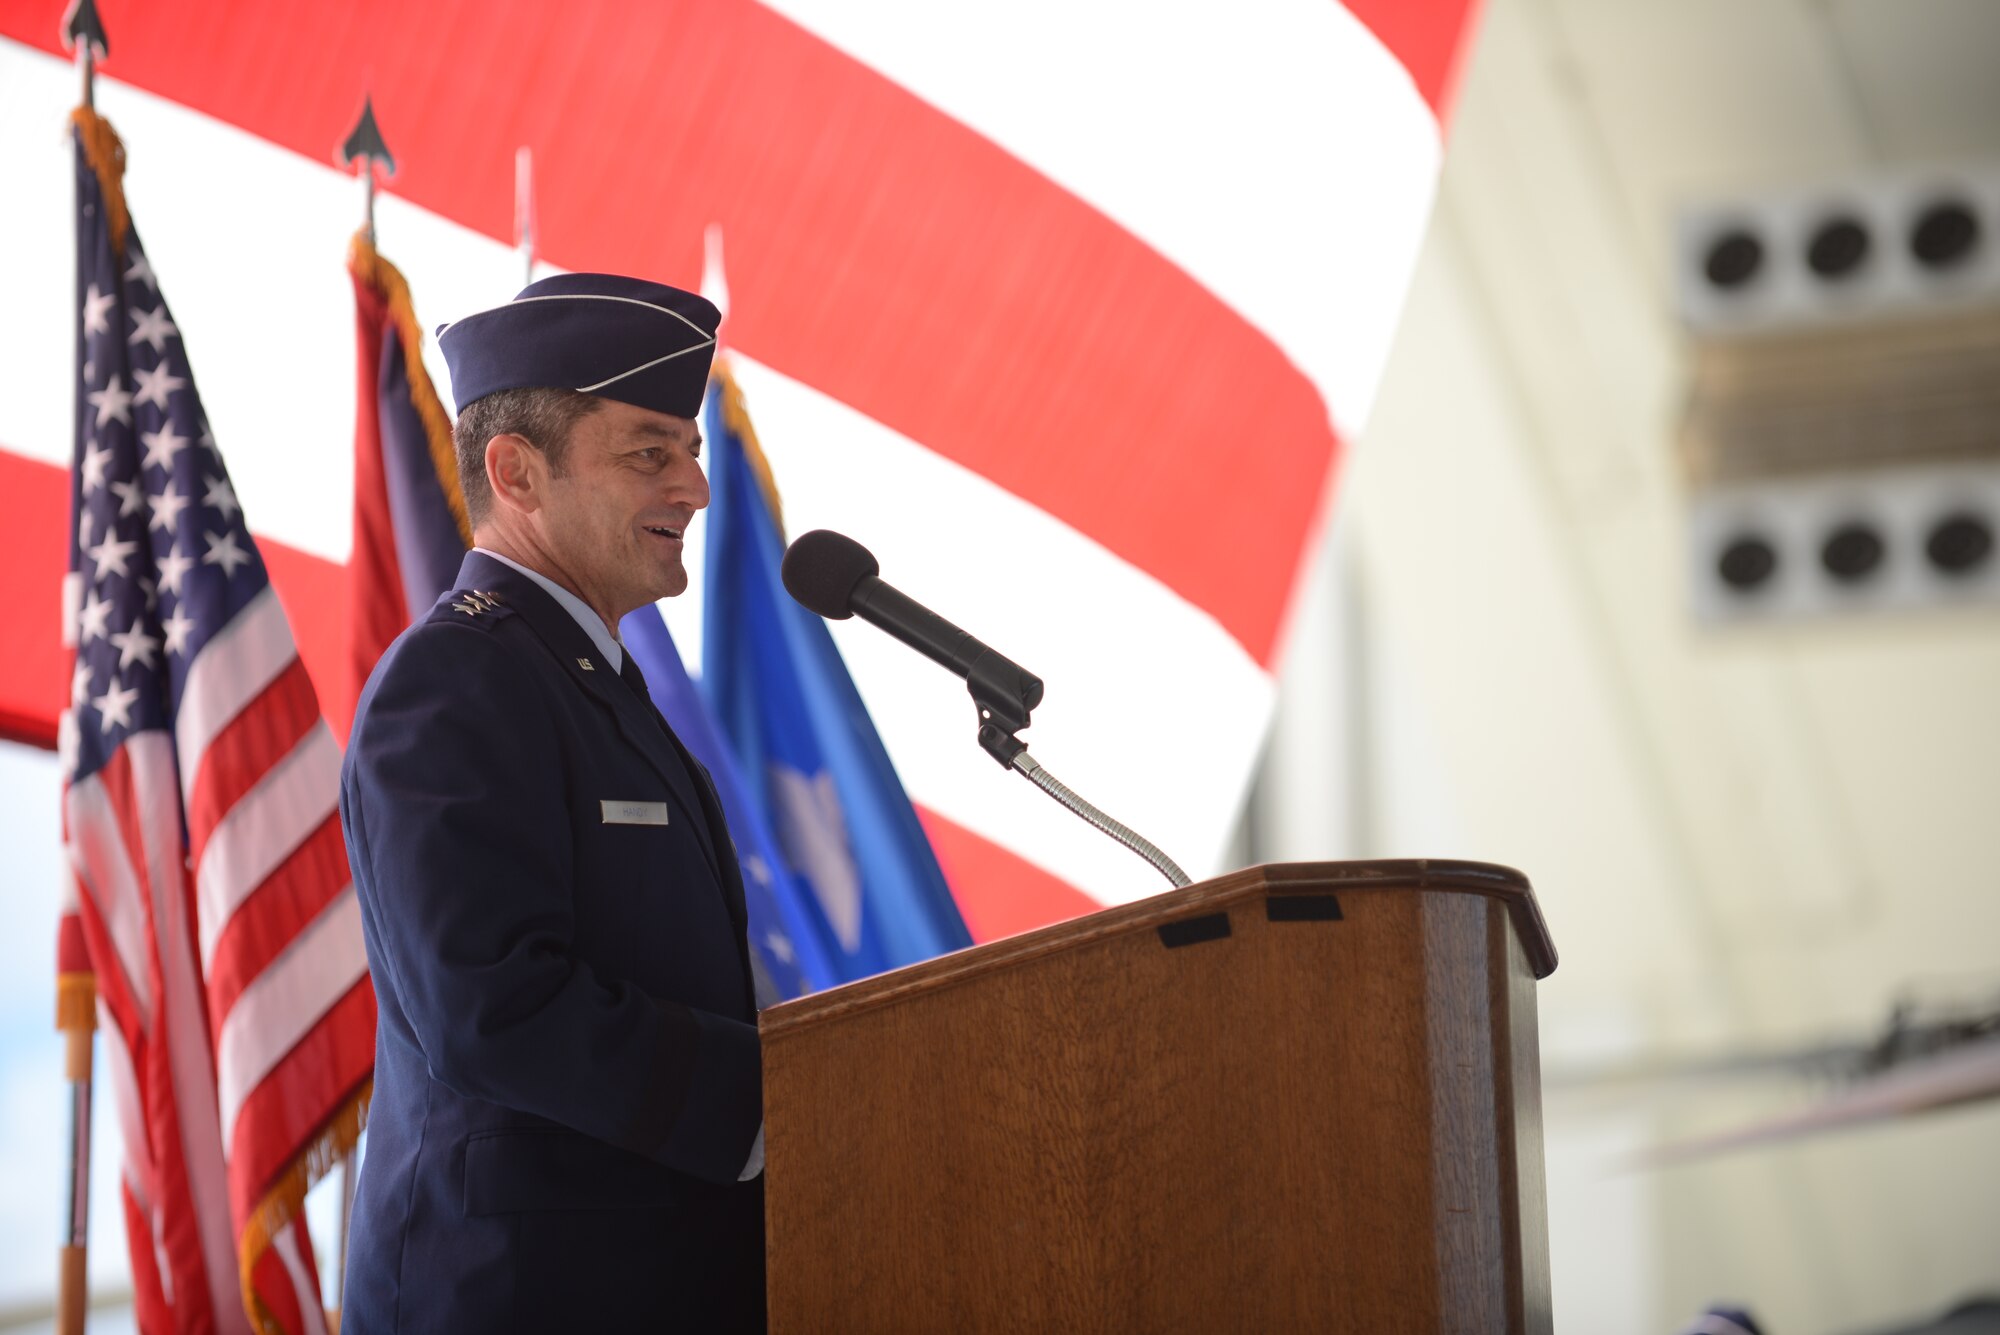 Lt. Gen. Russell Handy, 11th Air Force commander, speaks to Team Andersen during the 36th Wing Change of Command ceremony June 19, 2014 on Andersen Air Force Base, Guam. Handy officiated the transition of authority of the Wing from Brig. Gen. Steven Garland to Brig. Gen. Andrew Toth. (U.S. Air Force photo by Airman 1st Class Adarius D. Petty/Released)